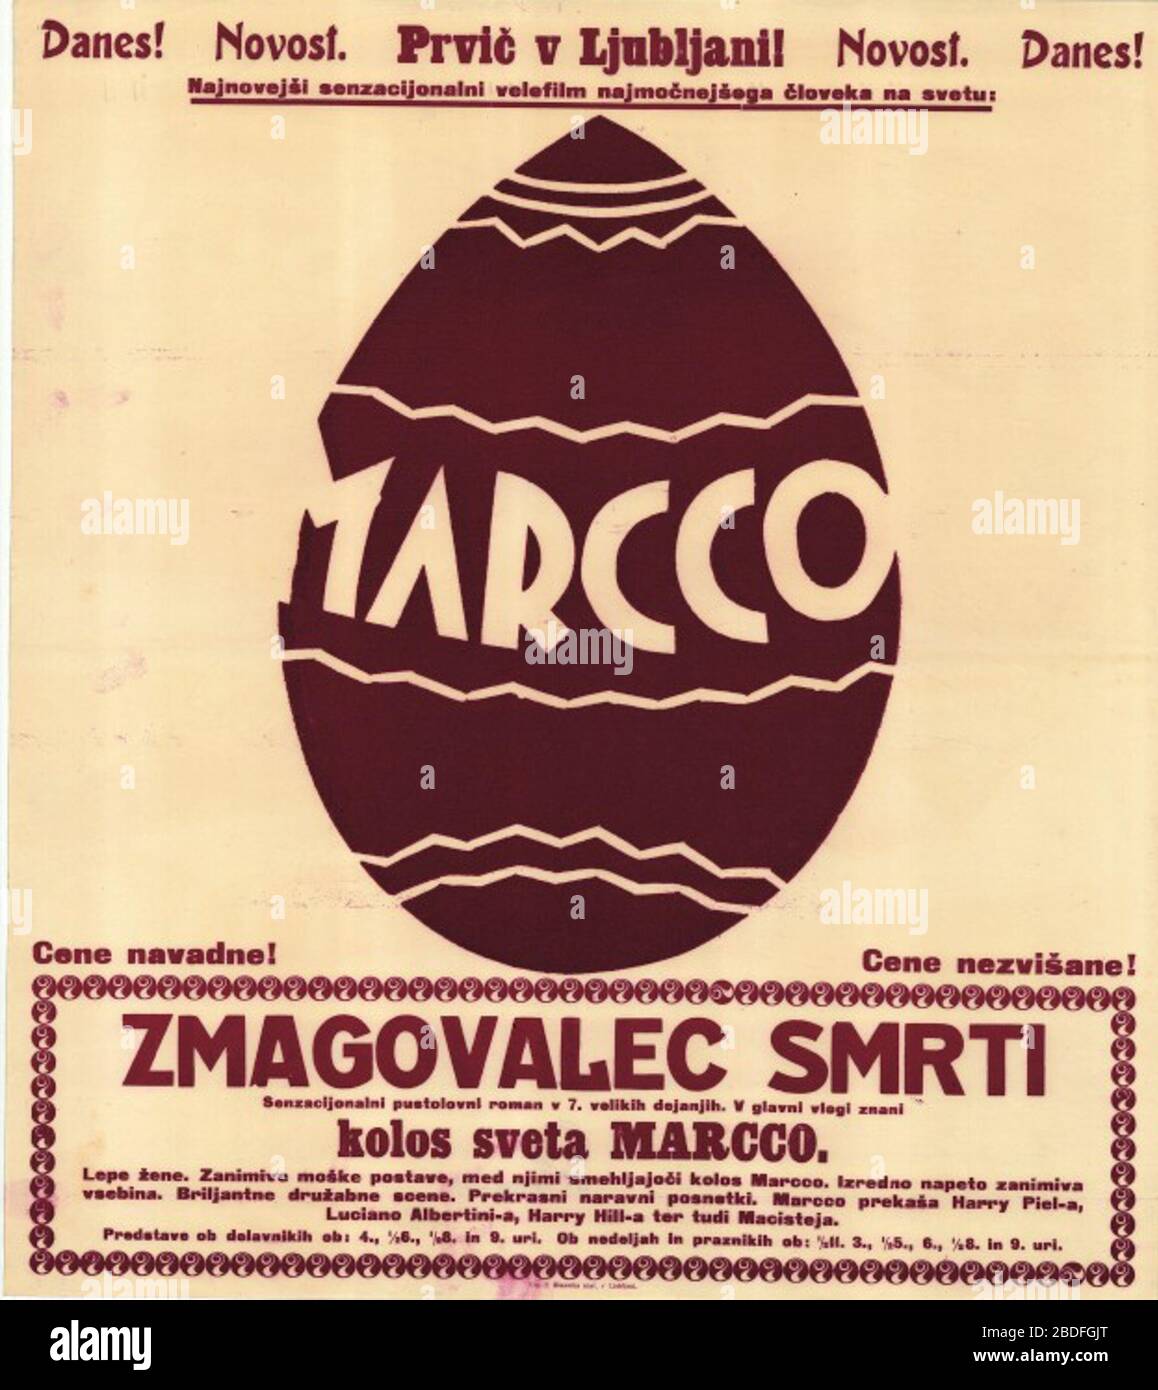 'Slovenščina: Plakat za film Zmagovalec smrti; 1920; This image is available from the Digital Library of Slovenia under the reference number H5DGWW20  This tag does not indicate the copyright status of the attached work. A normal copyright tag is still required. See Commons:Licensing for more information. Deutsch | English | español | italiano | македонски | polski | português | slovenščina | +/−; Unknown author; ' Stock Photo